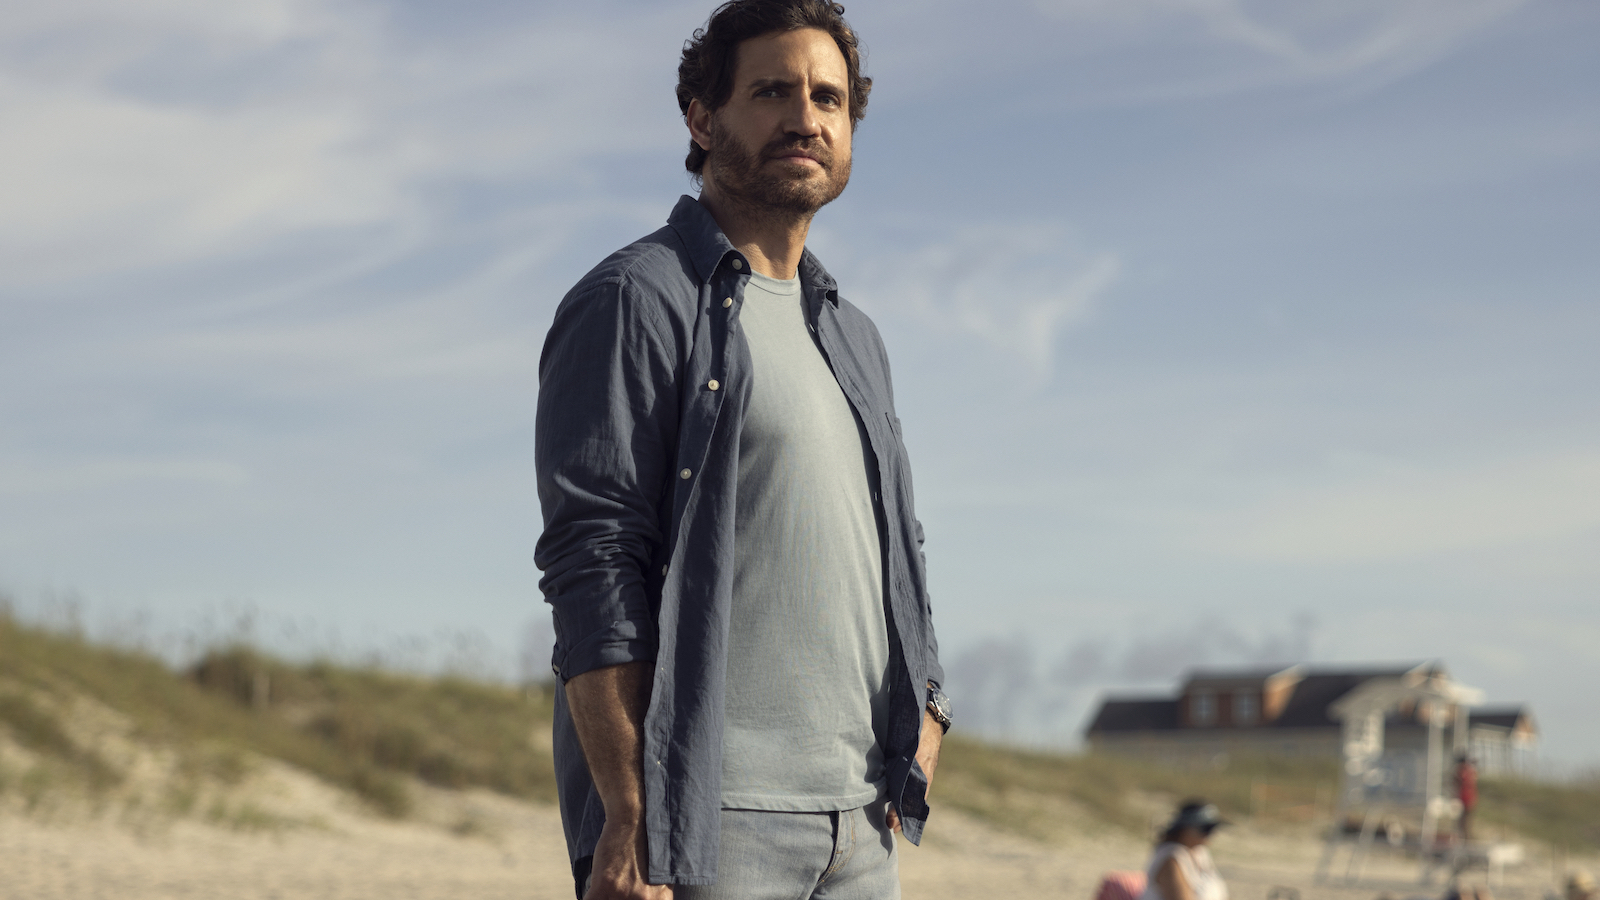 Florida Man, the review: how to freak out in Florida and live happily (with Edgar Ramirez)